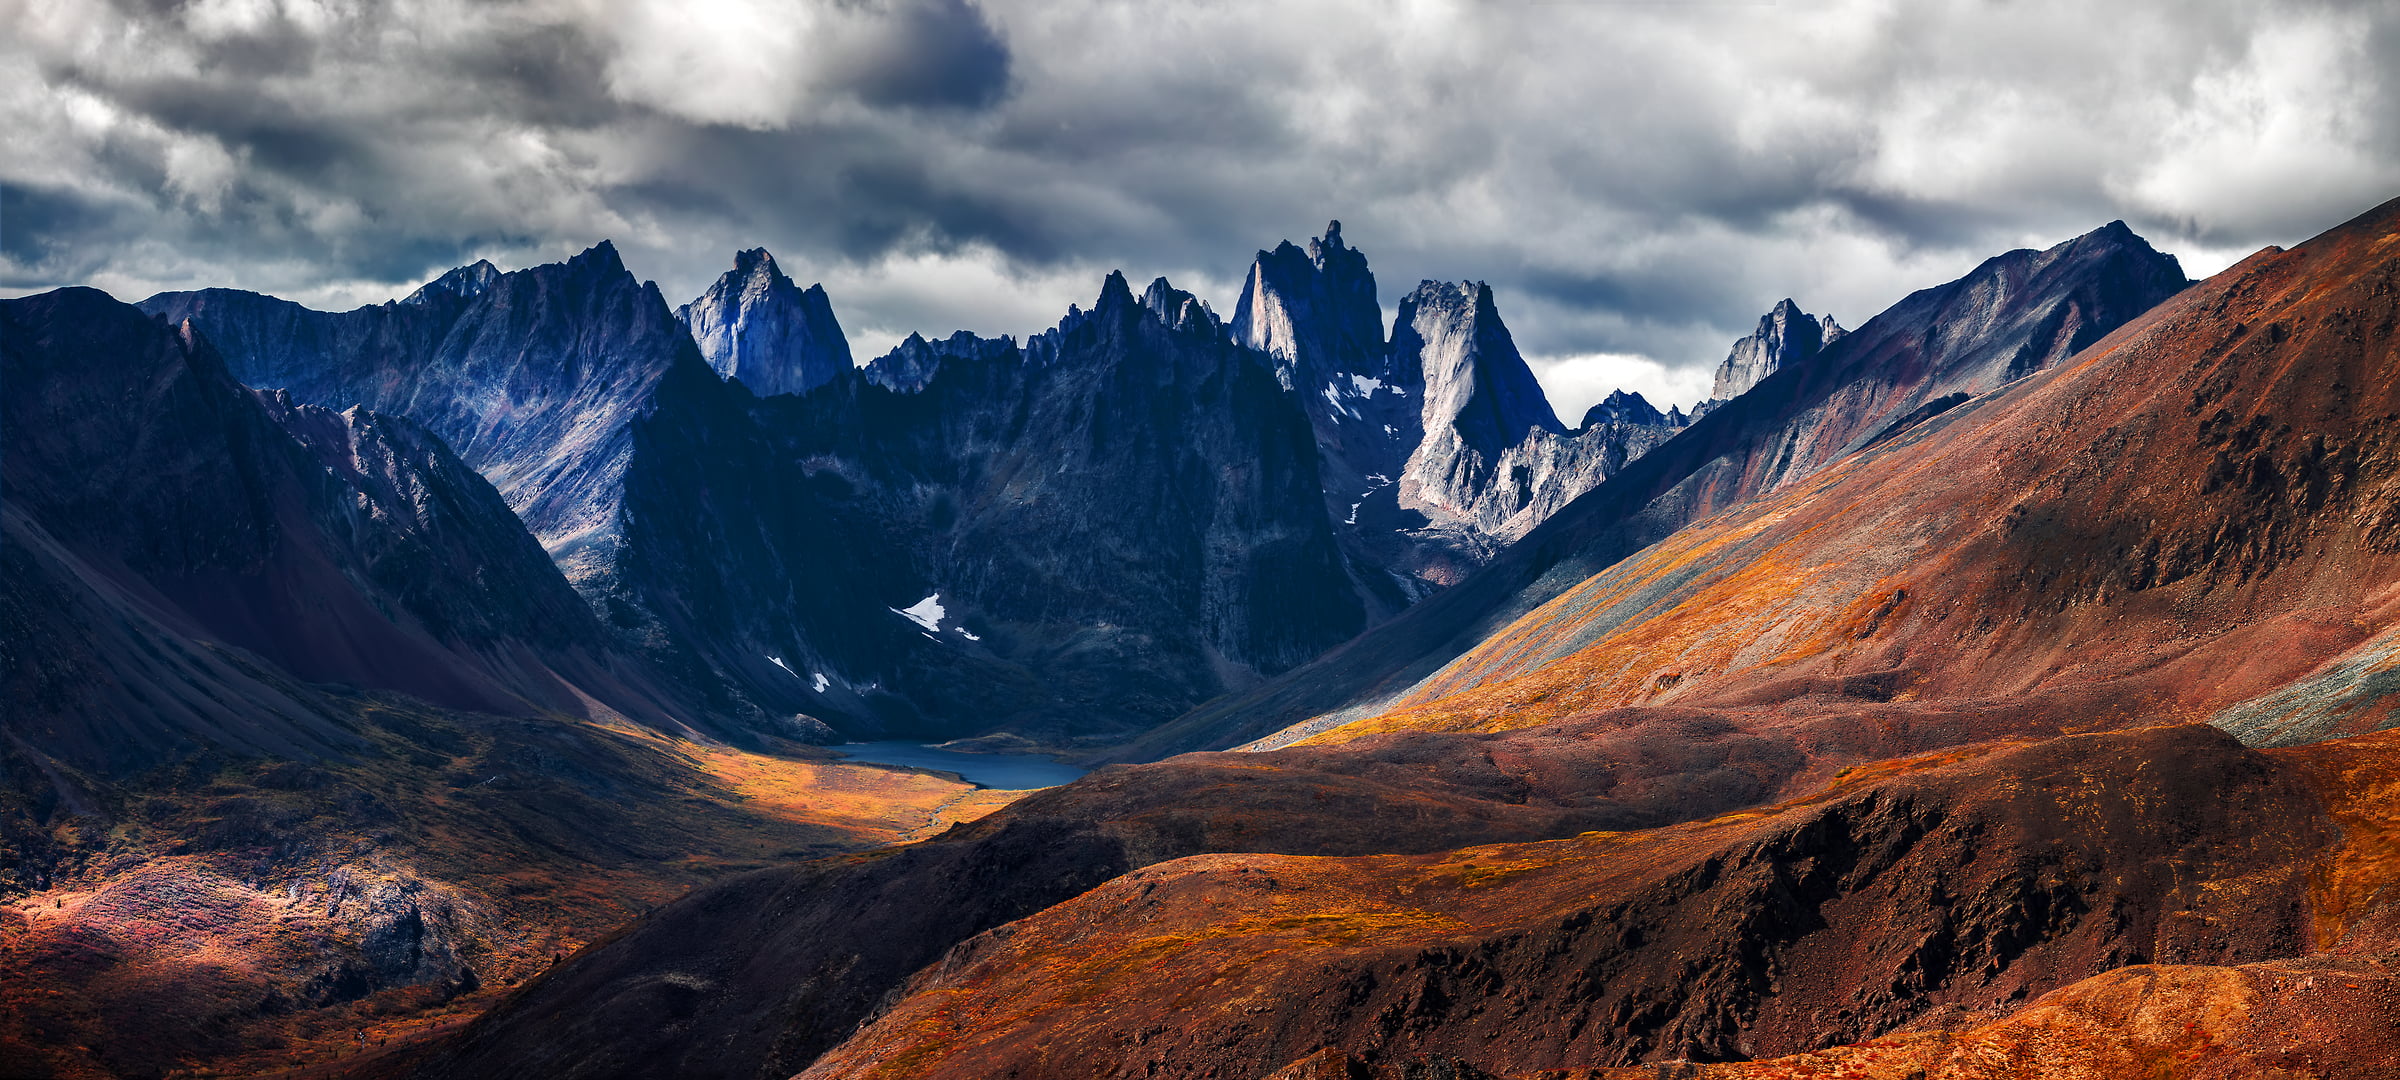 209 megapixels! A very high resolution, large-format VAST photo print of a remote landscape; photograph created by Chris Collacott in Tombstone Territorial Park, Yukon, Canada